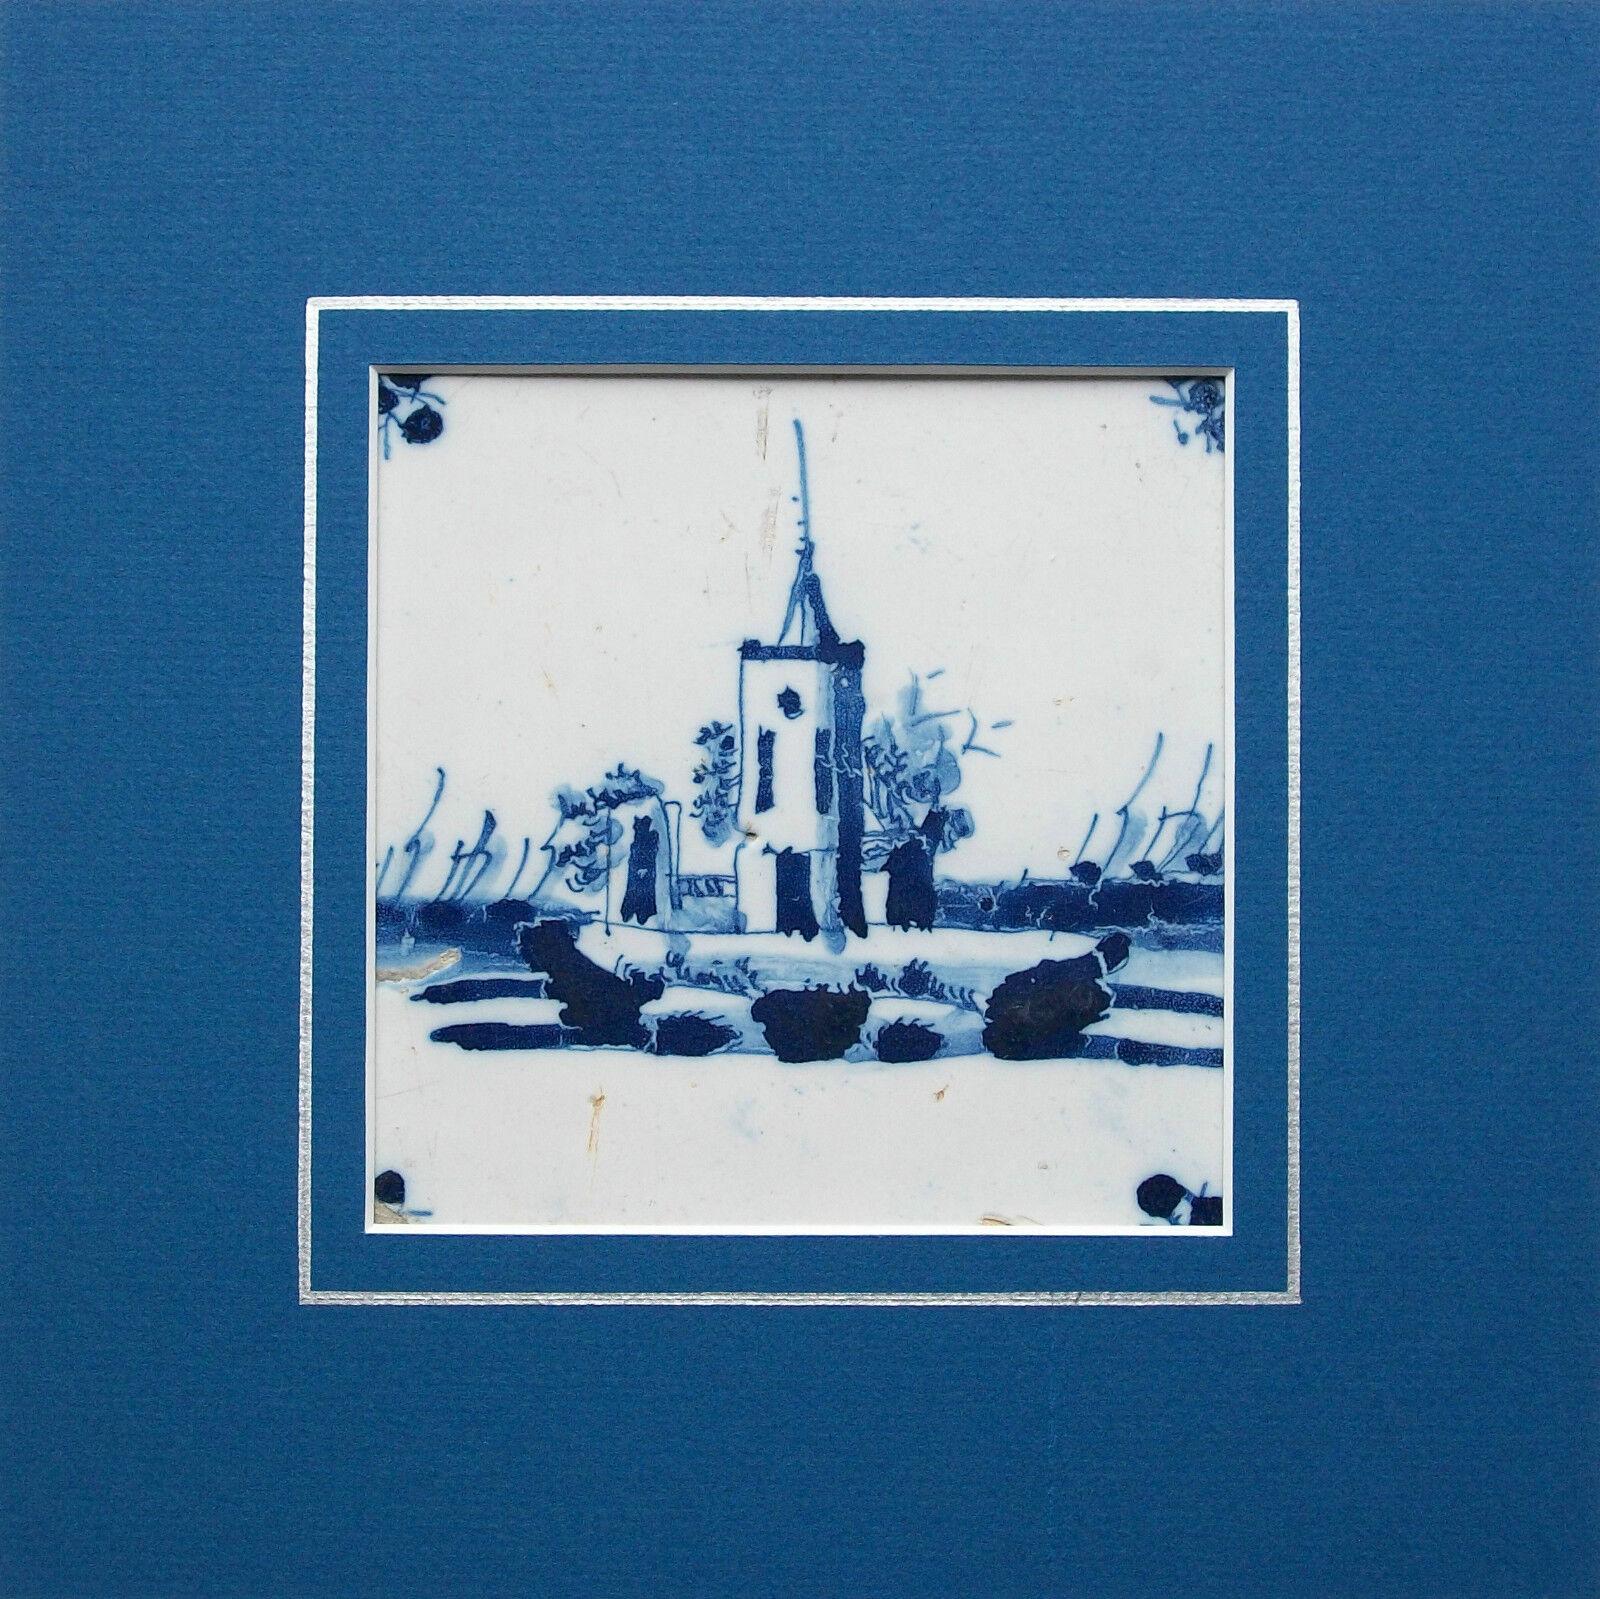 Antique Dutch delft ceramic tile - hand crafted - hand painted cobalt blue glaze - unsigned - Holland / Netherlands - 17th century.

Contained in a professional contemporary metal frame - surrounded by a blue matte board with bevel edge and hand